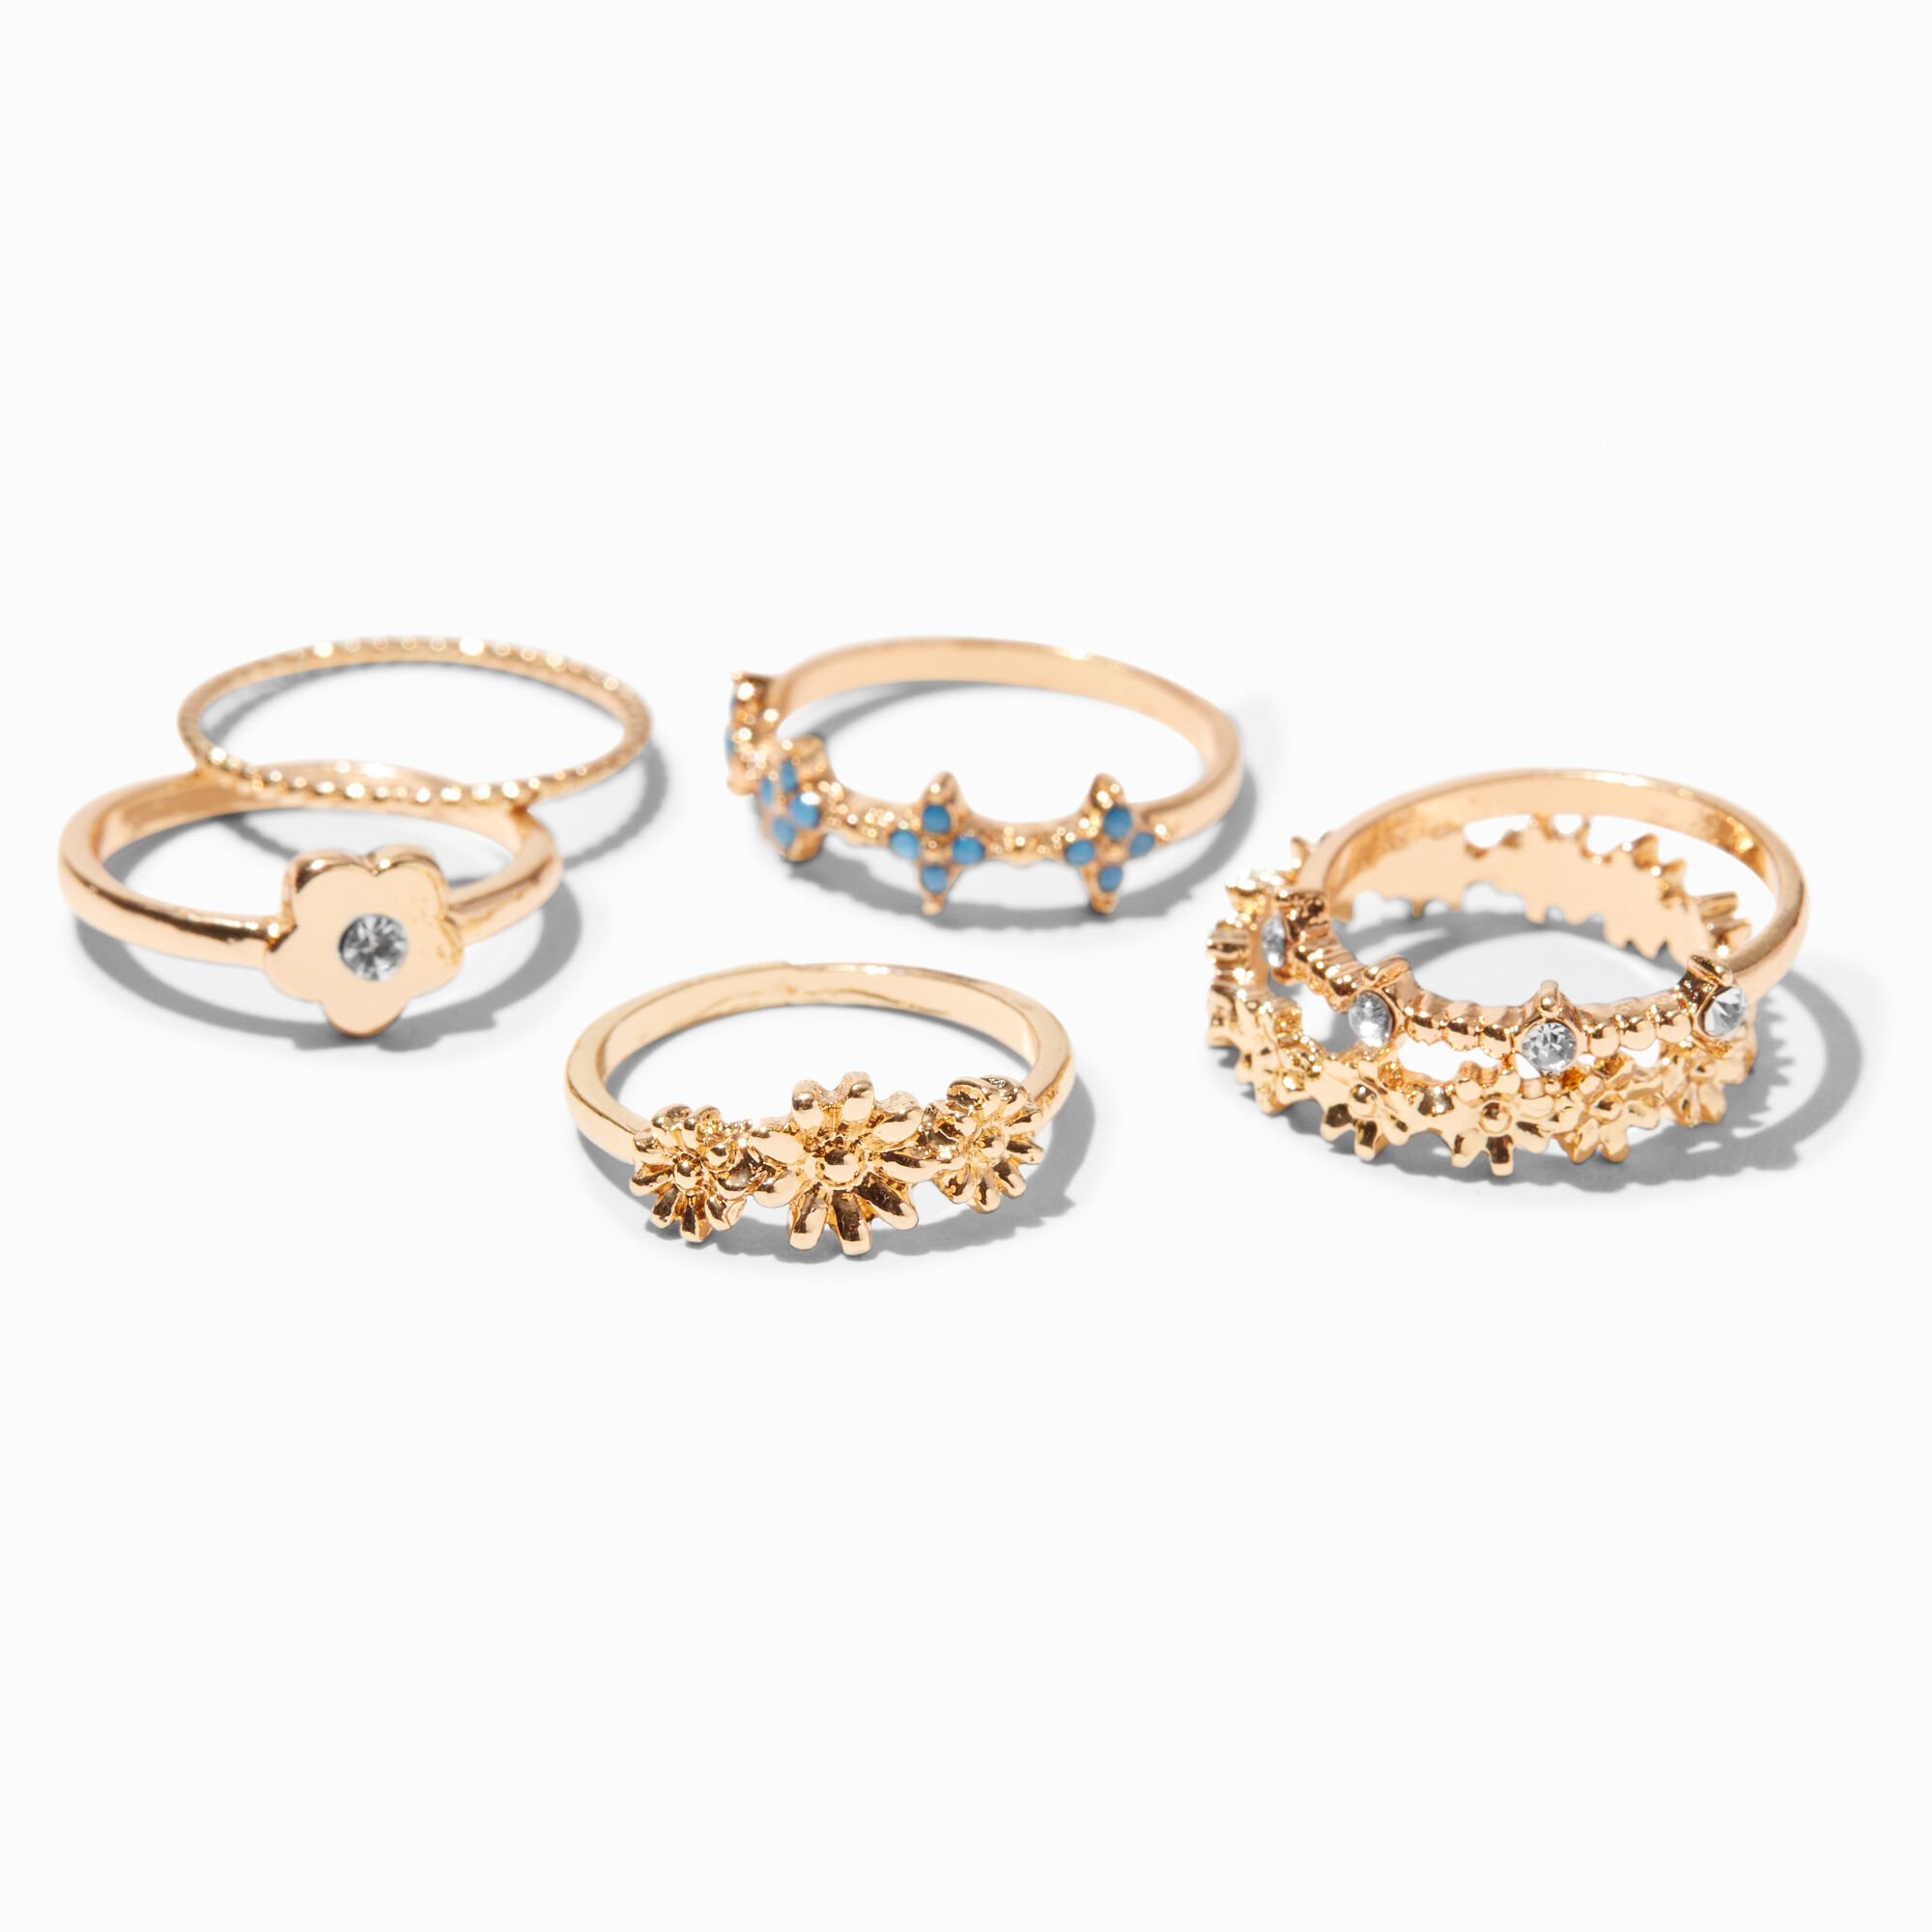 View Claires Daisy Flower Rings 6 Pack Gold information